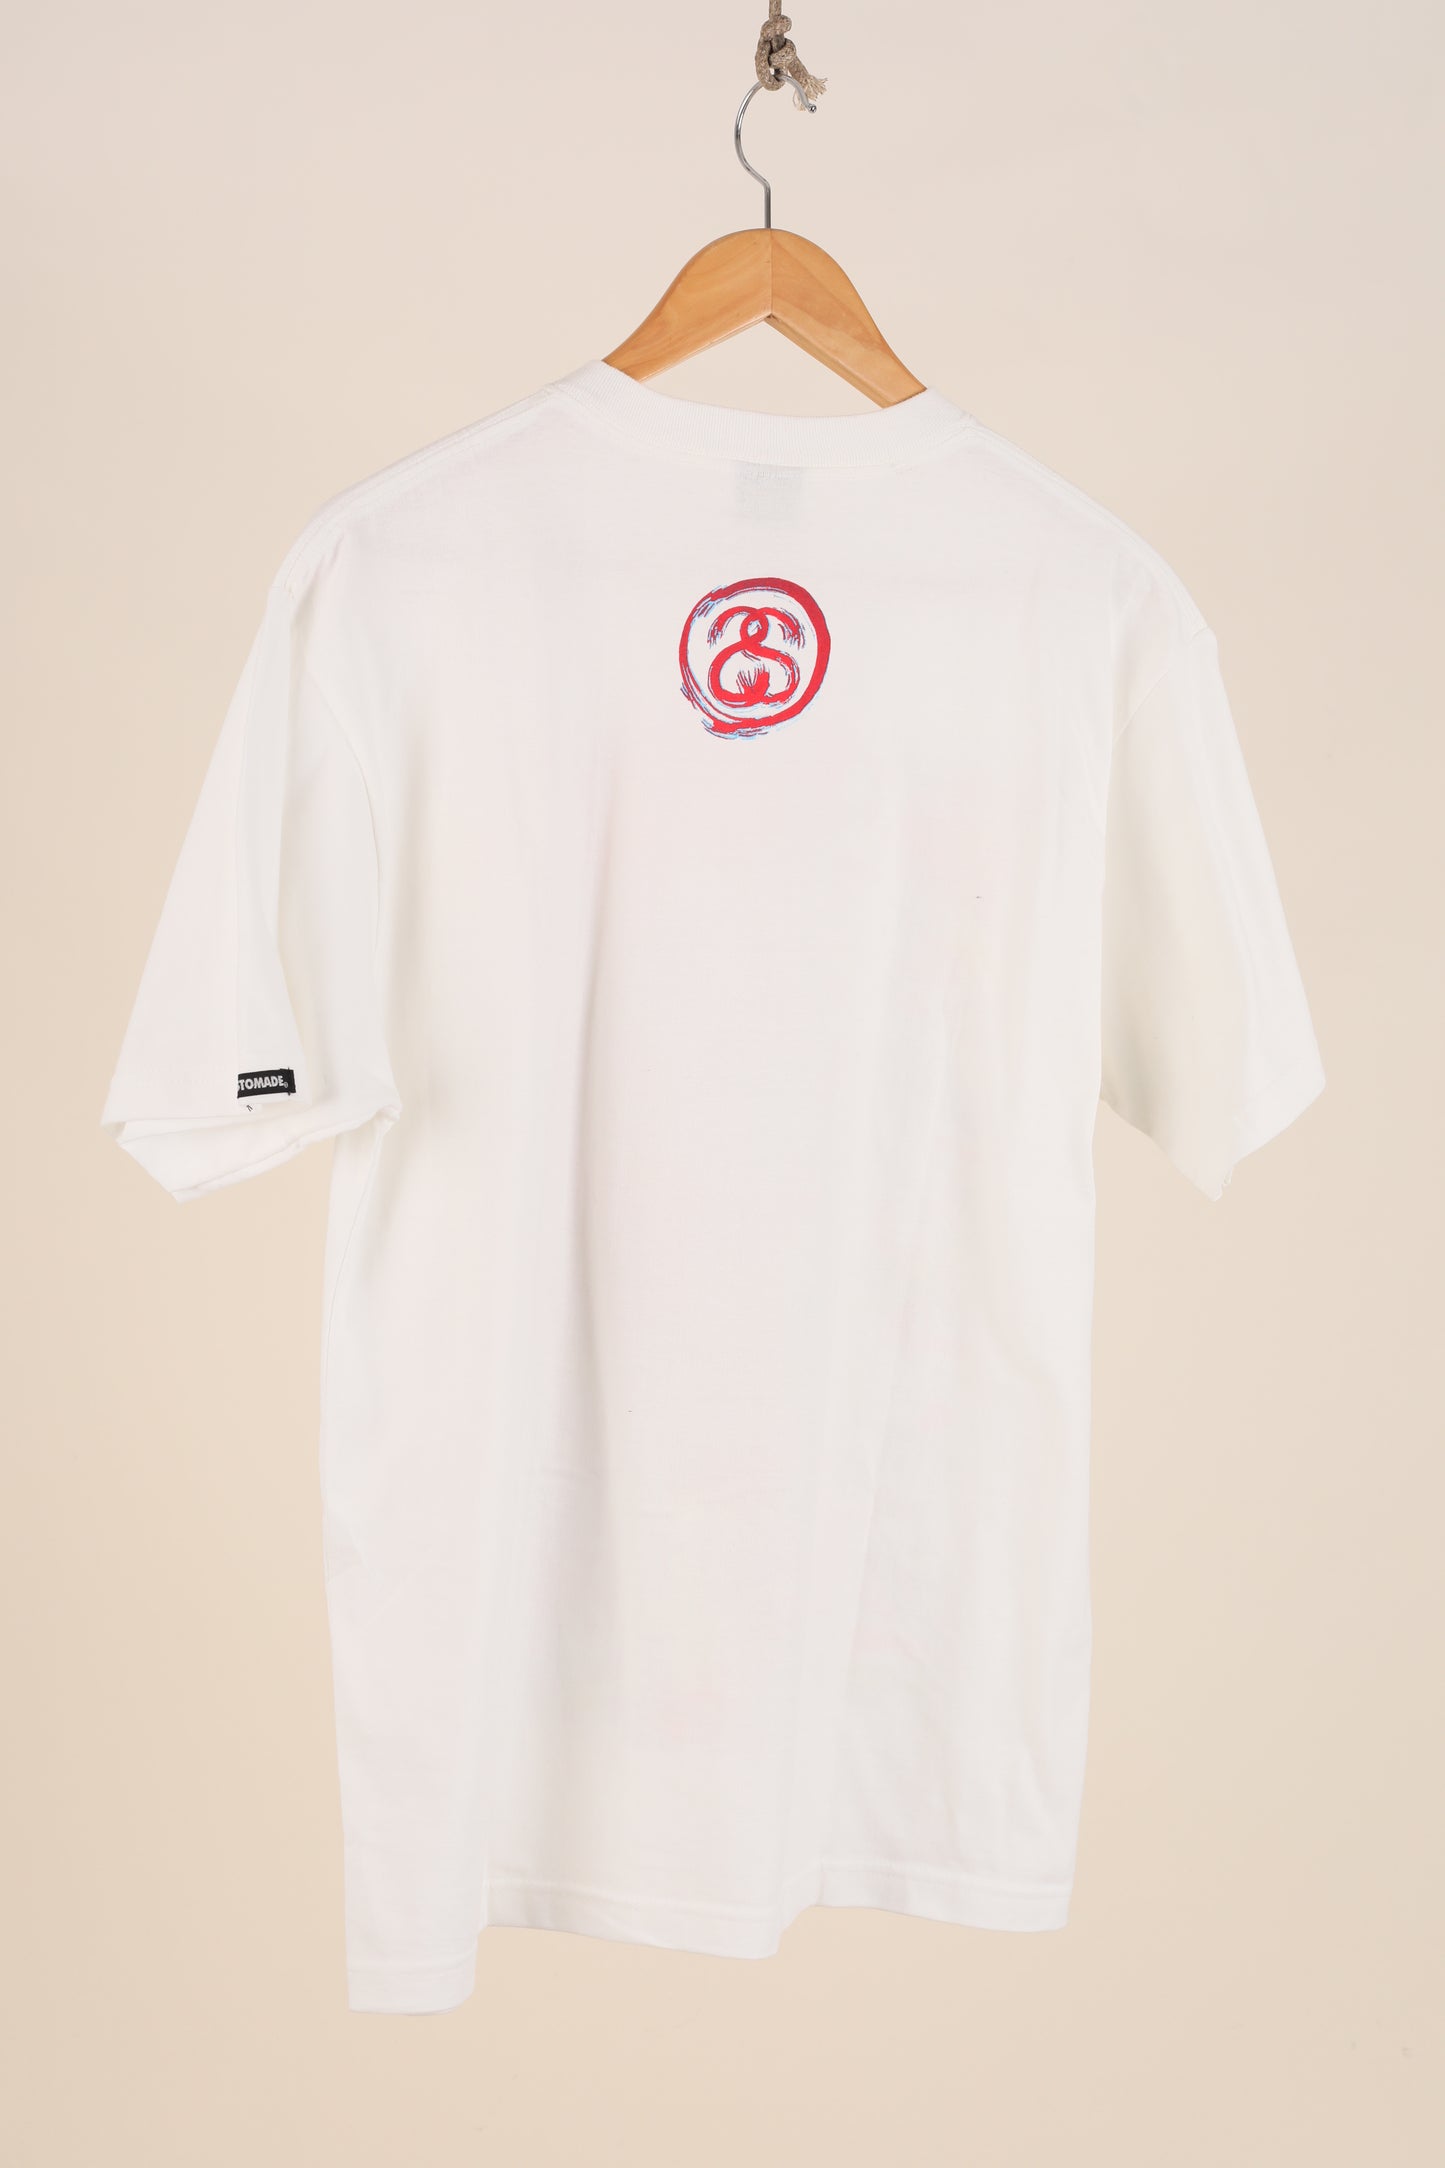 Deadstock Stussy Customade World-A-Fear tee - White (L)